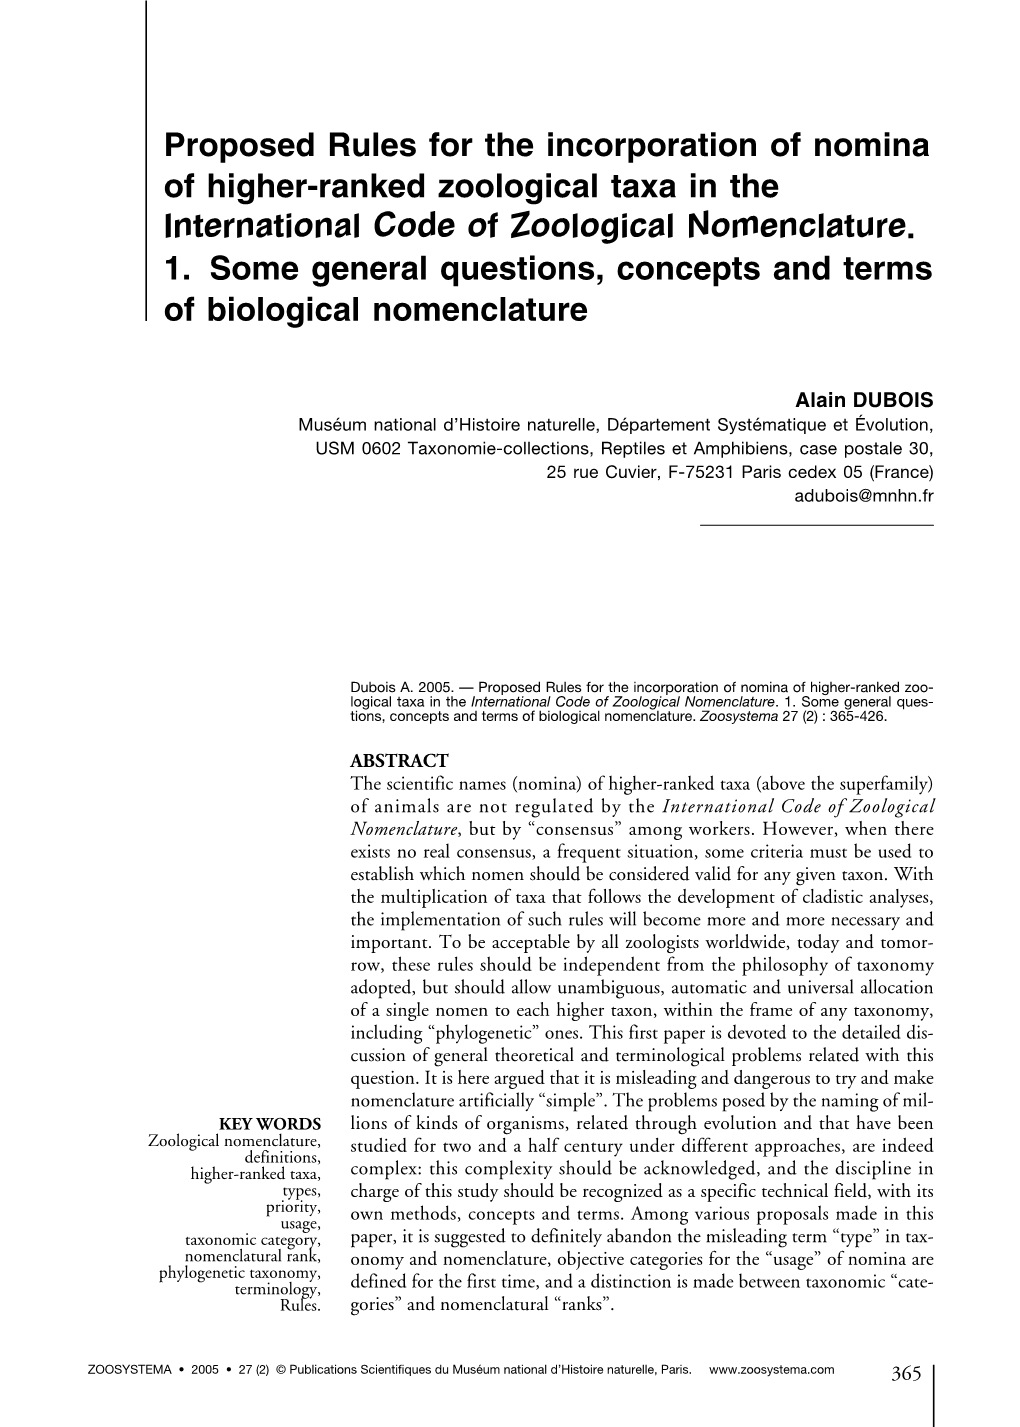 Proposed Rules for the Incorporation of Nomina of Higher-Ranked Zoological Taxa in the International Code of Zoological Nomenclature